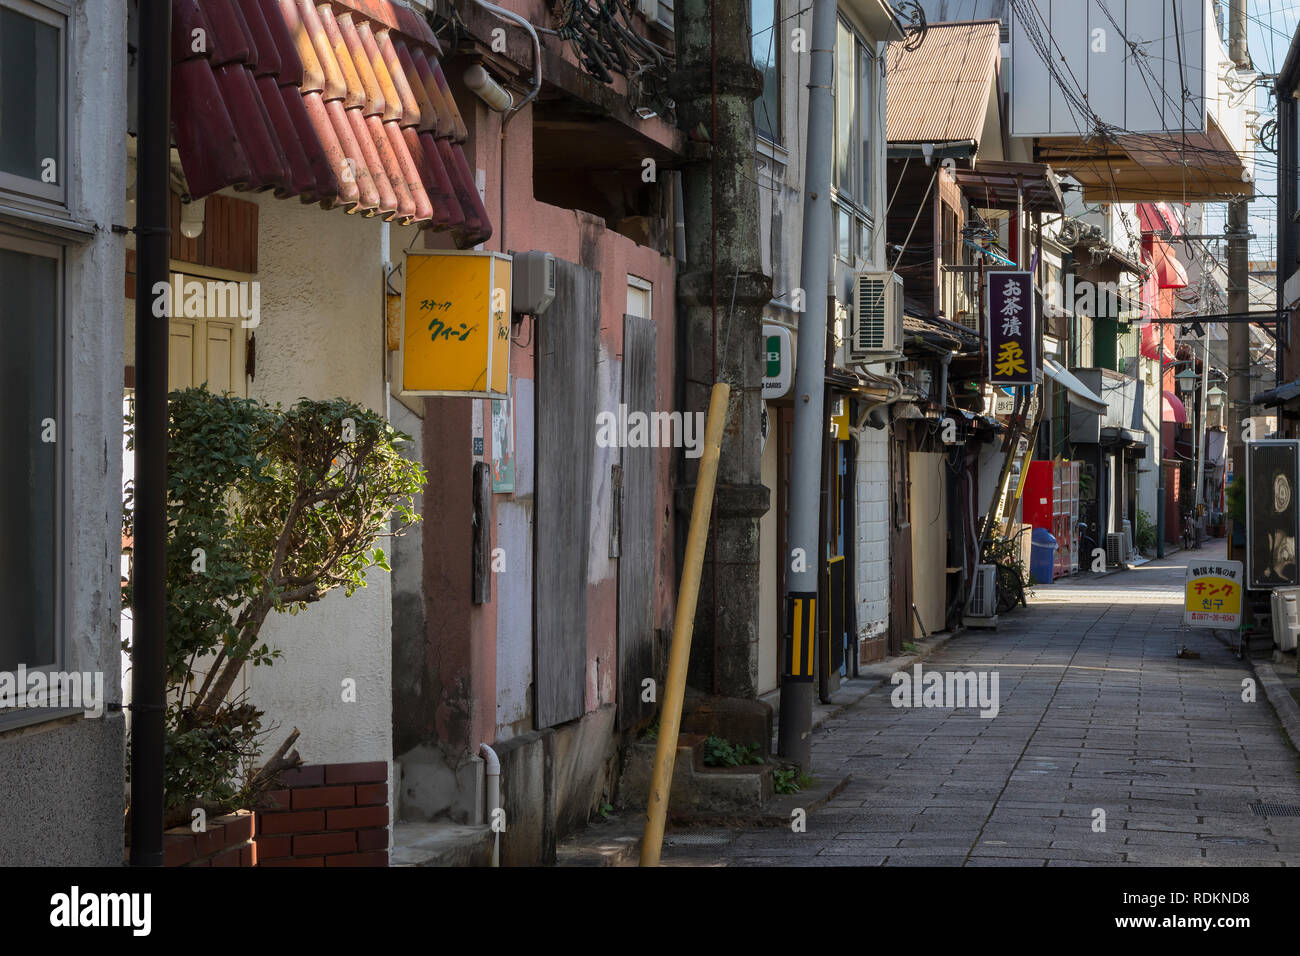 Beppu, Japan - November 3, 2018: Small street in the centre of the city of Beppu with signs and lots of electricity wires Stock Photo